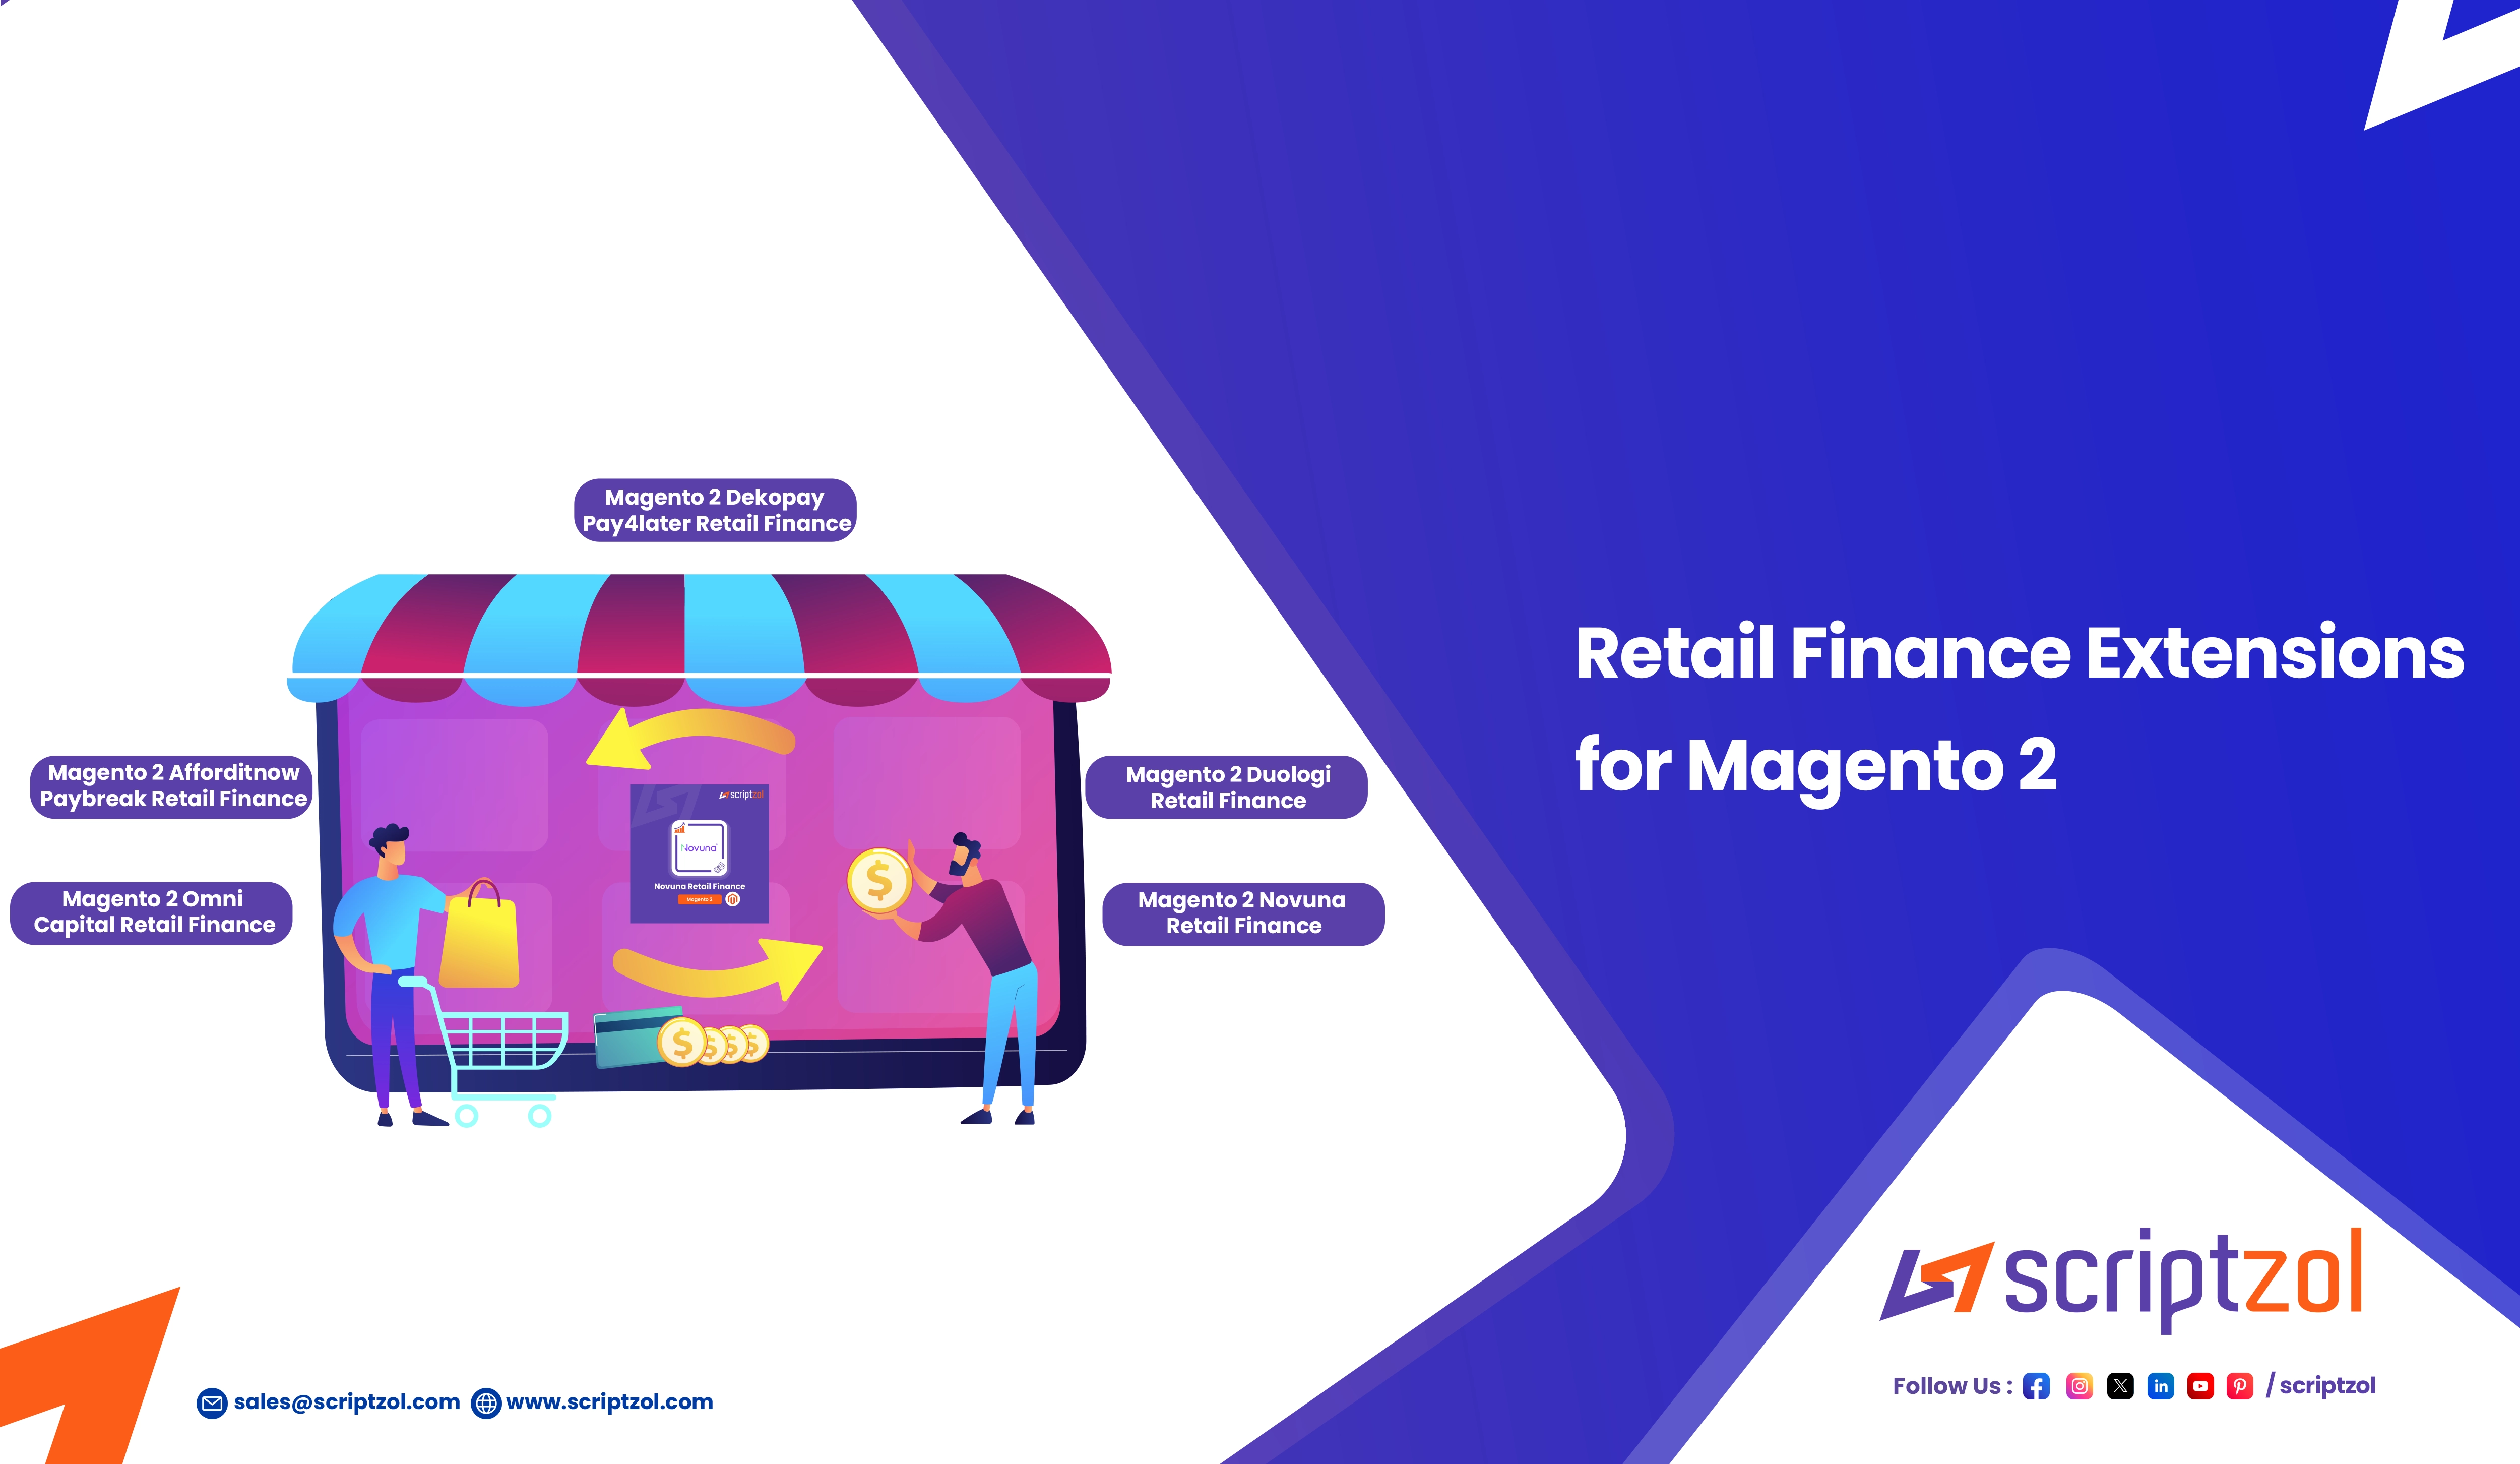 Retail Finance Extensions for Magento 2